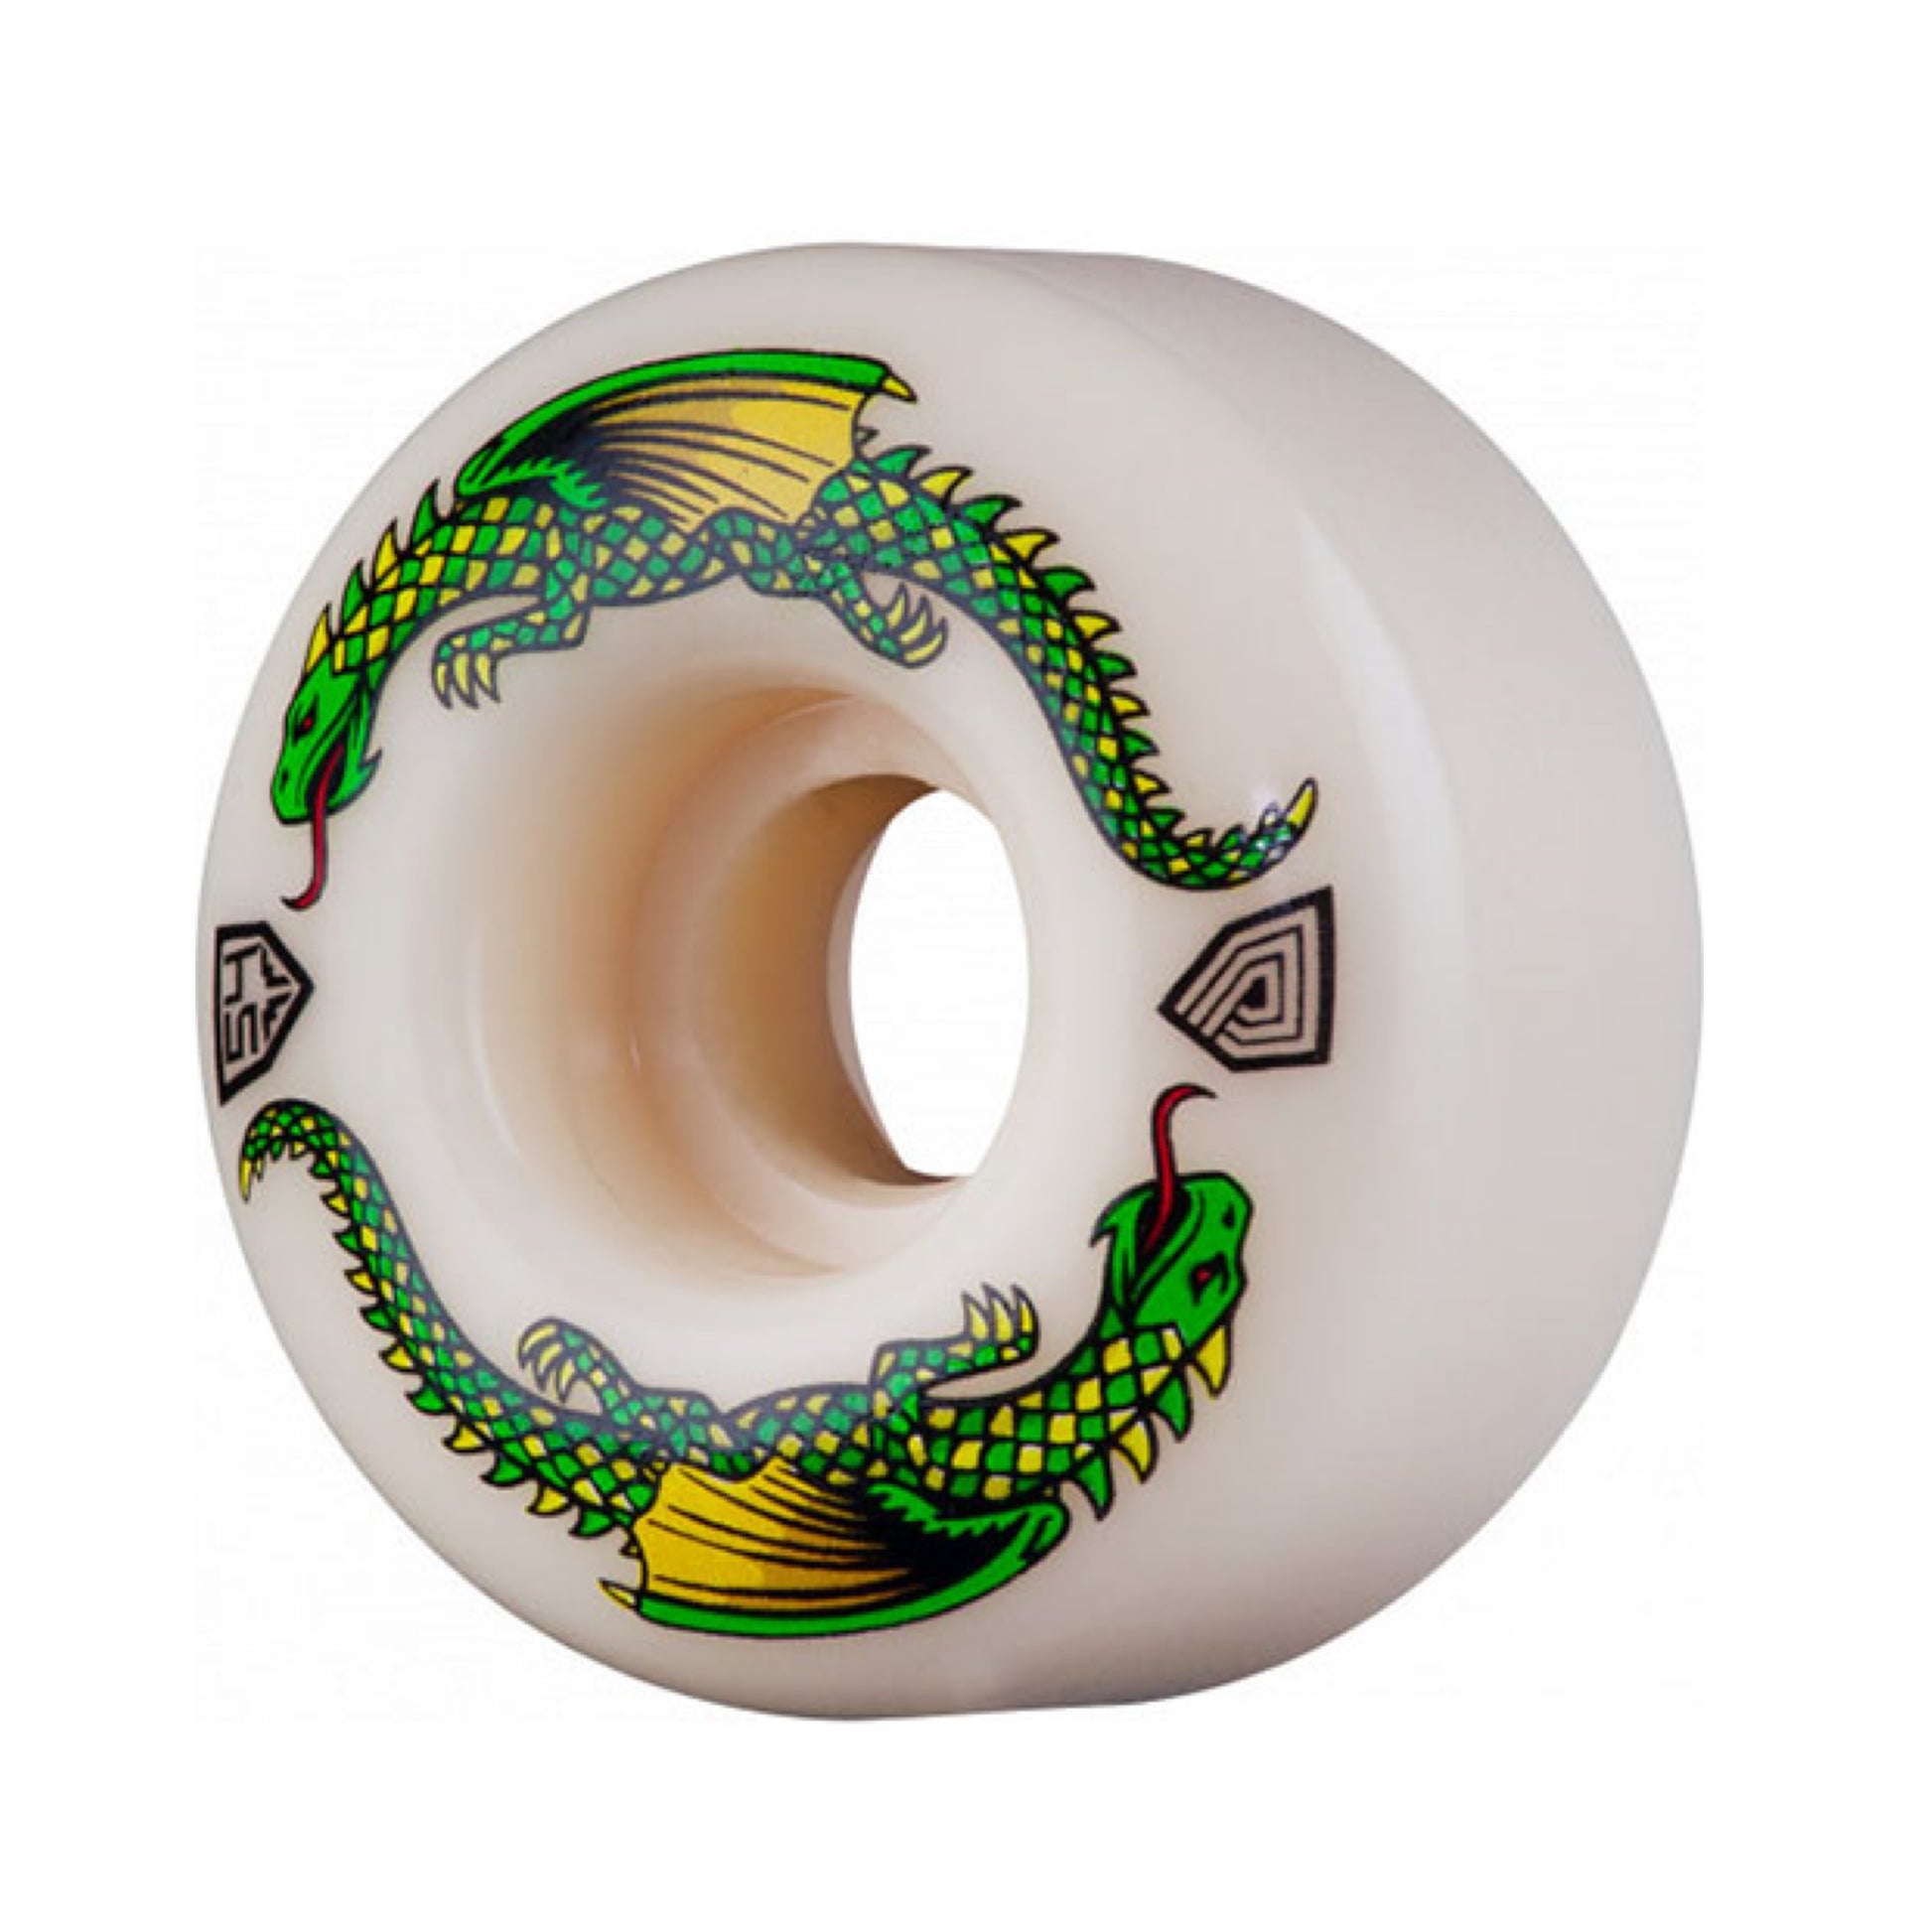 Powell Dragon Formula Skateboard Wheels; White wheels with a green and yellow dragon on the side print; Eye-catching dragon graphic adds a unique and bold touch;